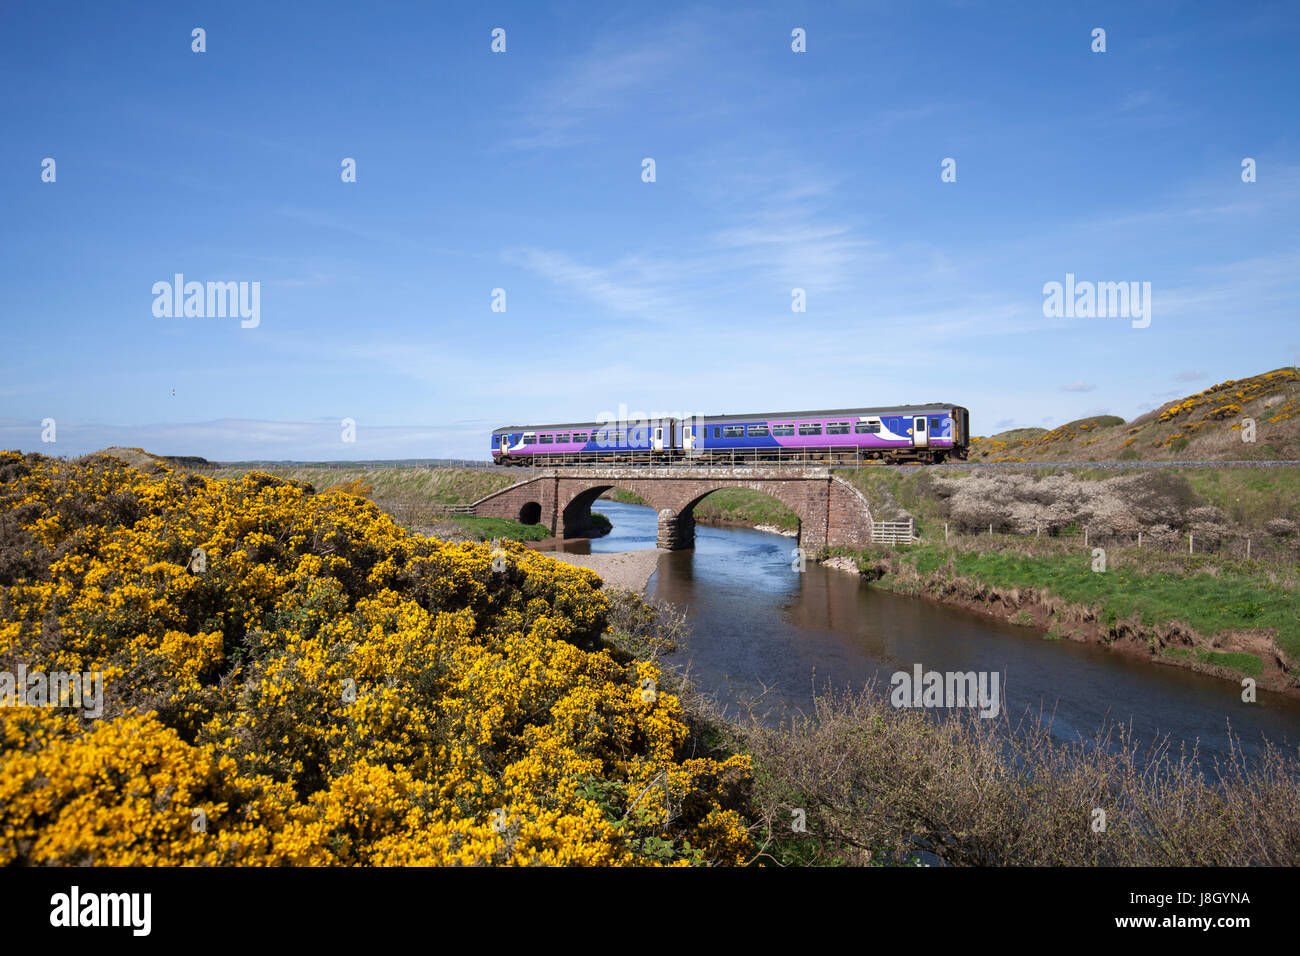 22/04/2017 Northern rail class 156 sprinter crosses the River Ehen at  High Sellafield  with a  Barrow In Furness - Carlisletrain Stock Photo